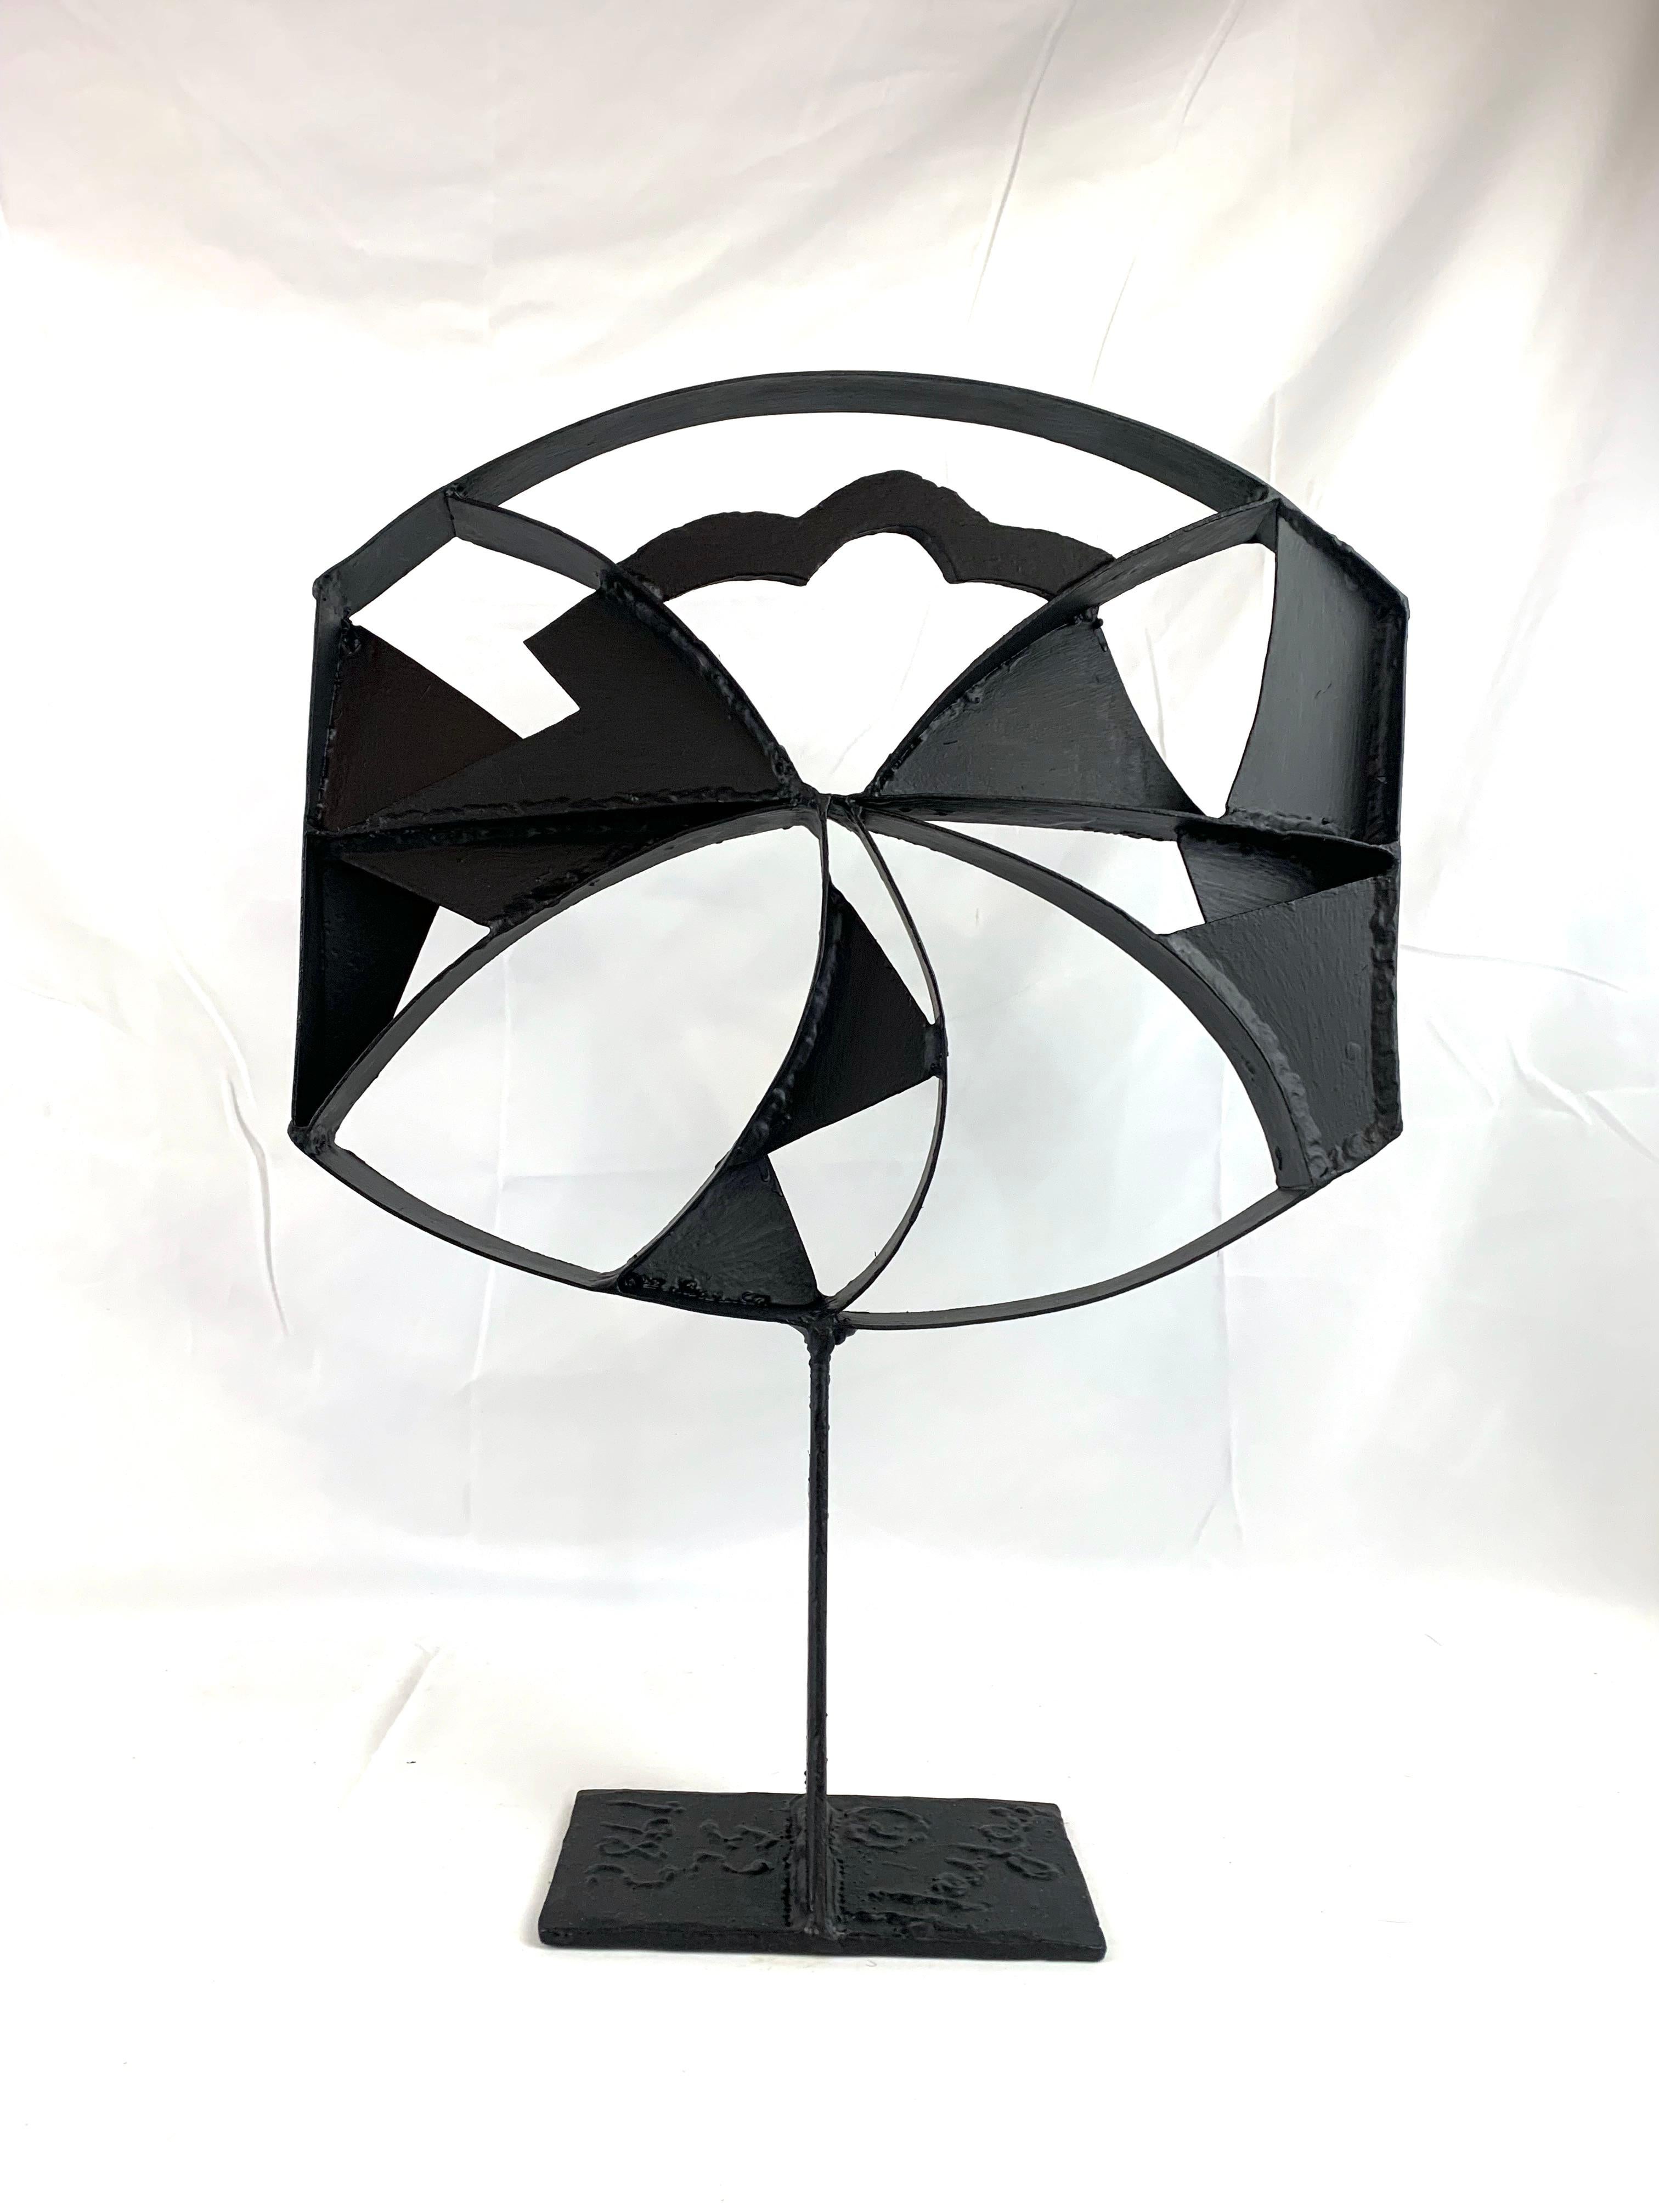 ODETTA is pleased to offer this important sculpture from the Estate of David Hayes

David Vincent Hayes (March 15, 1931 – April 9, 2013) was an American sculptor.

Hayes received a Bachelor of Arts degree from the University of Notre Dame in 1953,